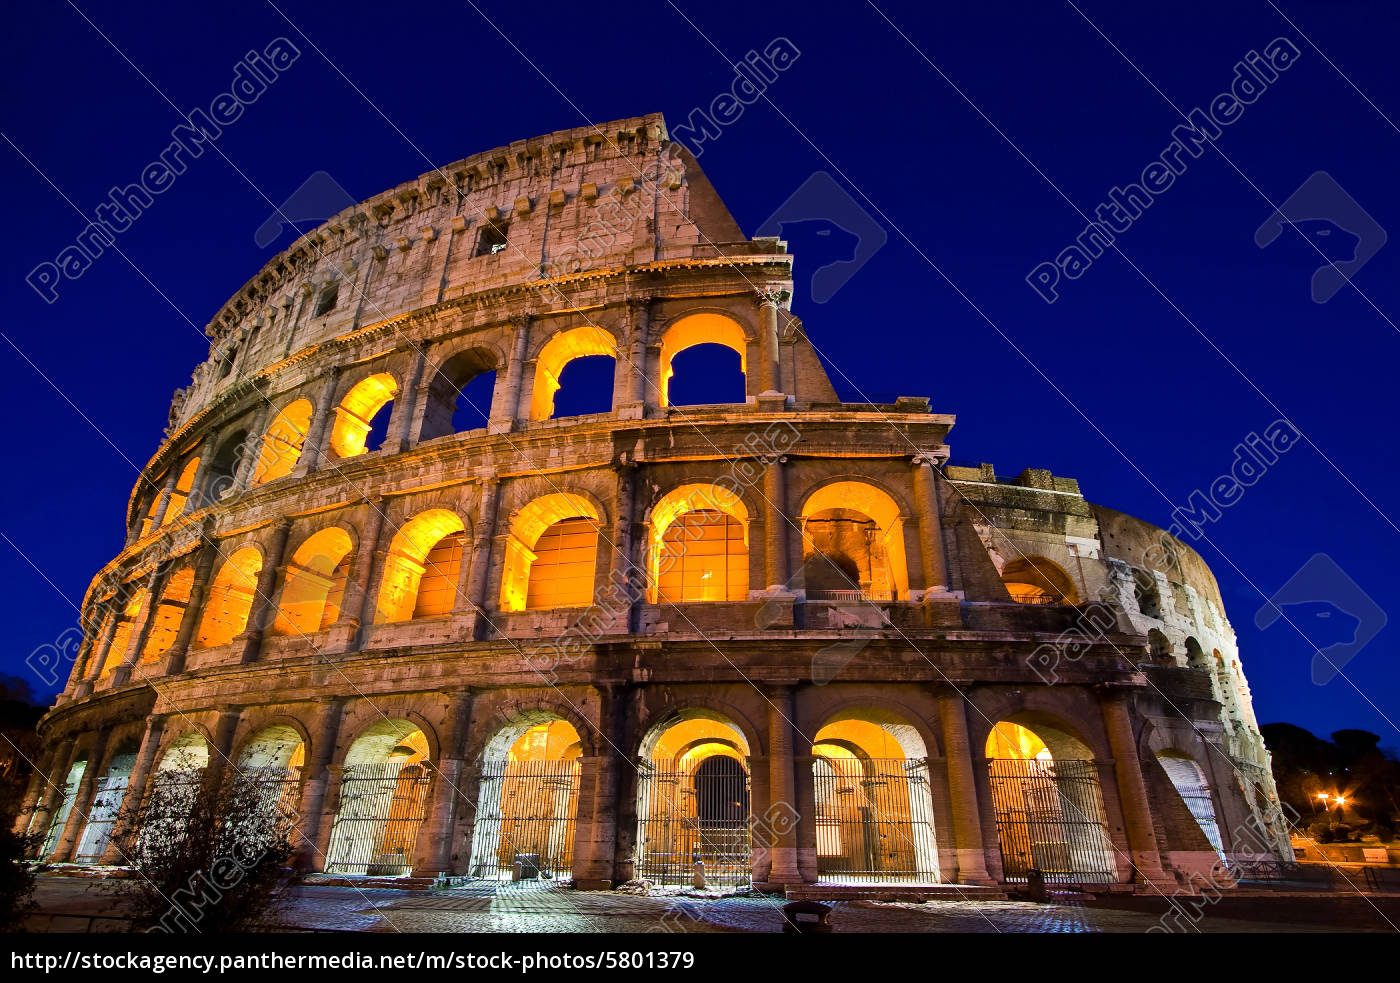 Colosseum Rome Italy Night Royalty Free Image Panthermedia Stock Agency